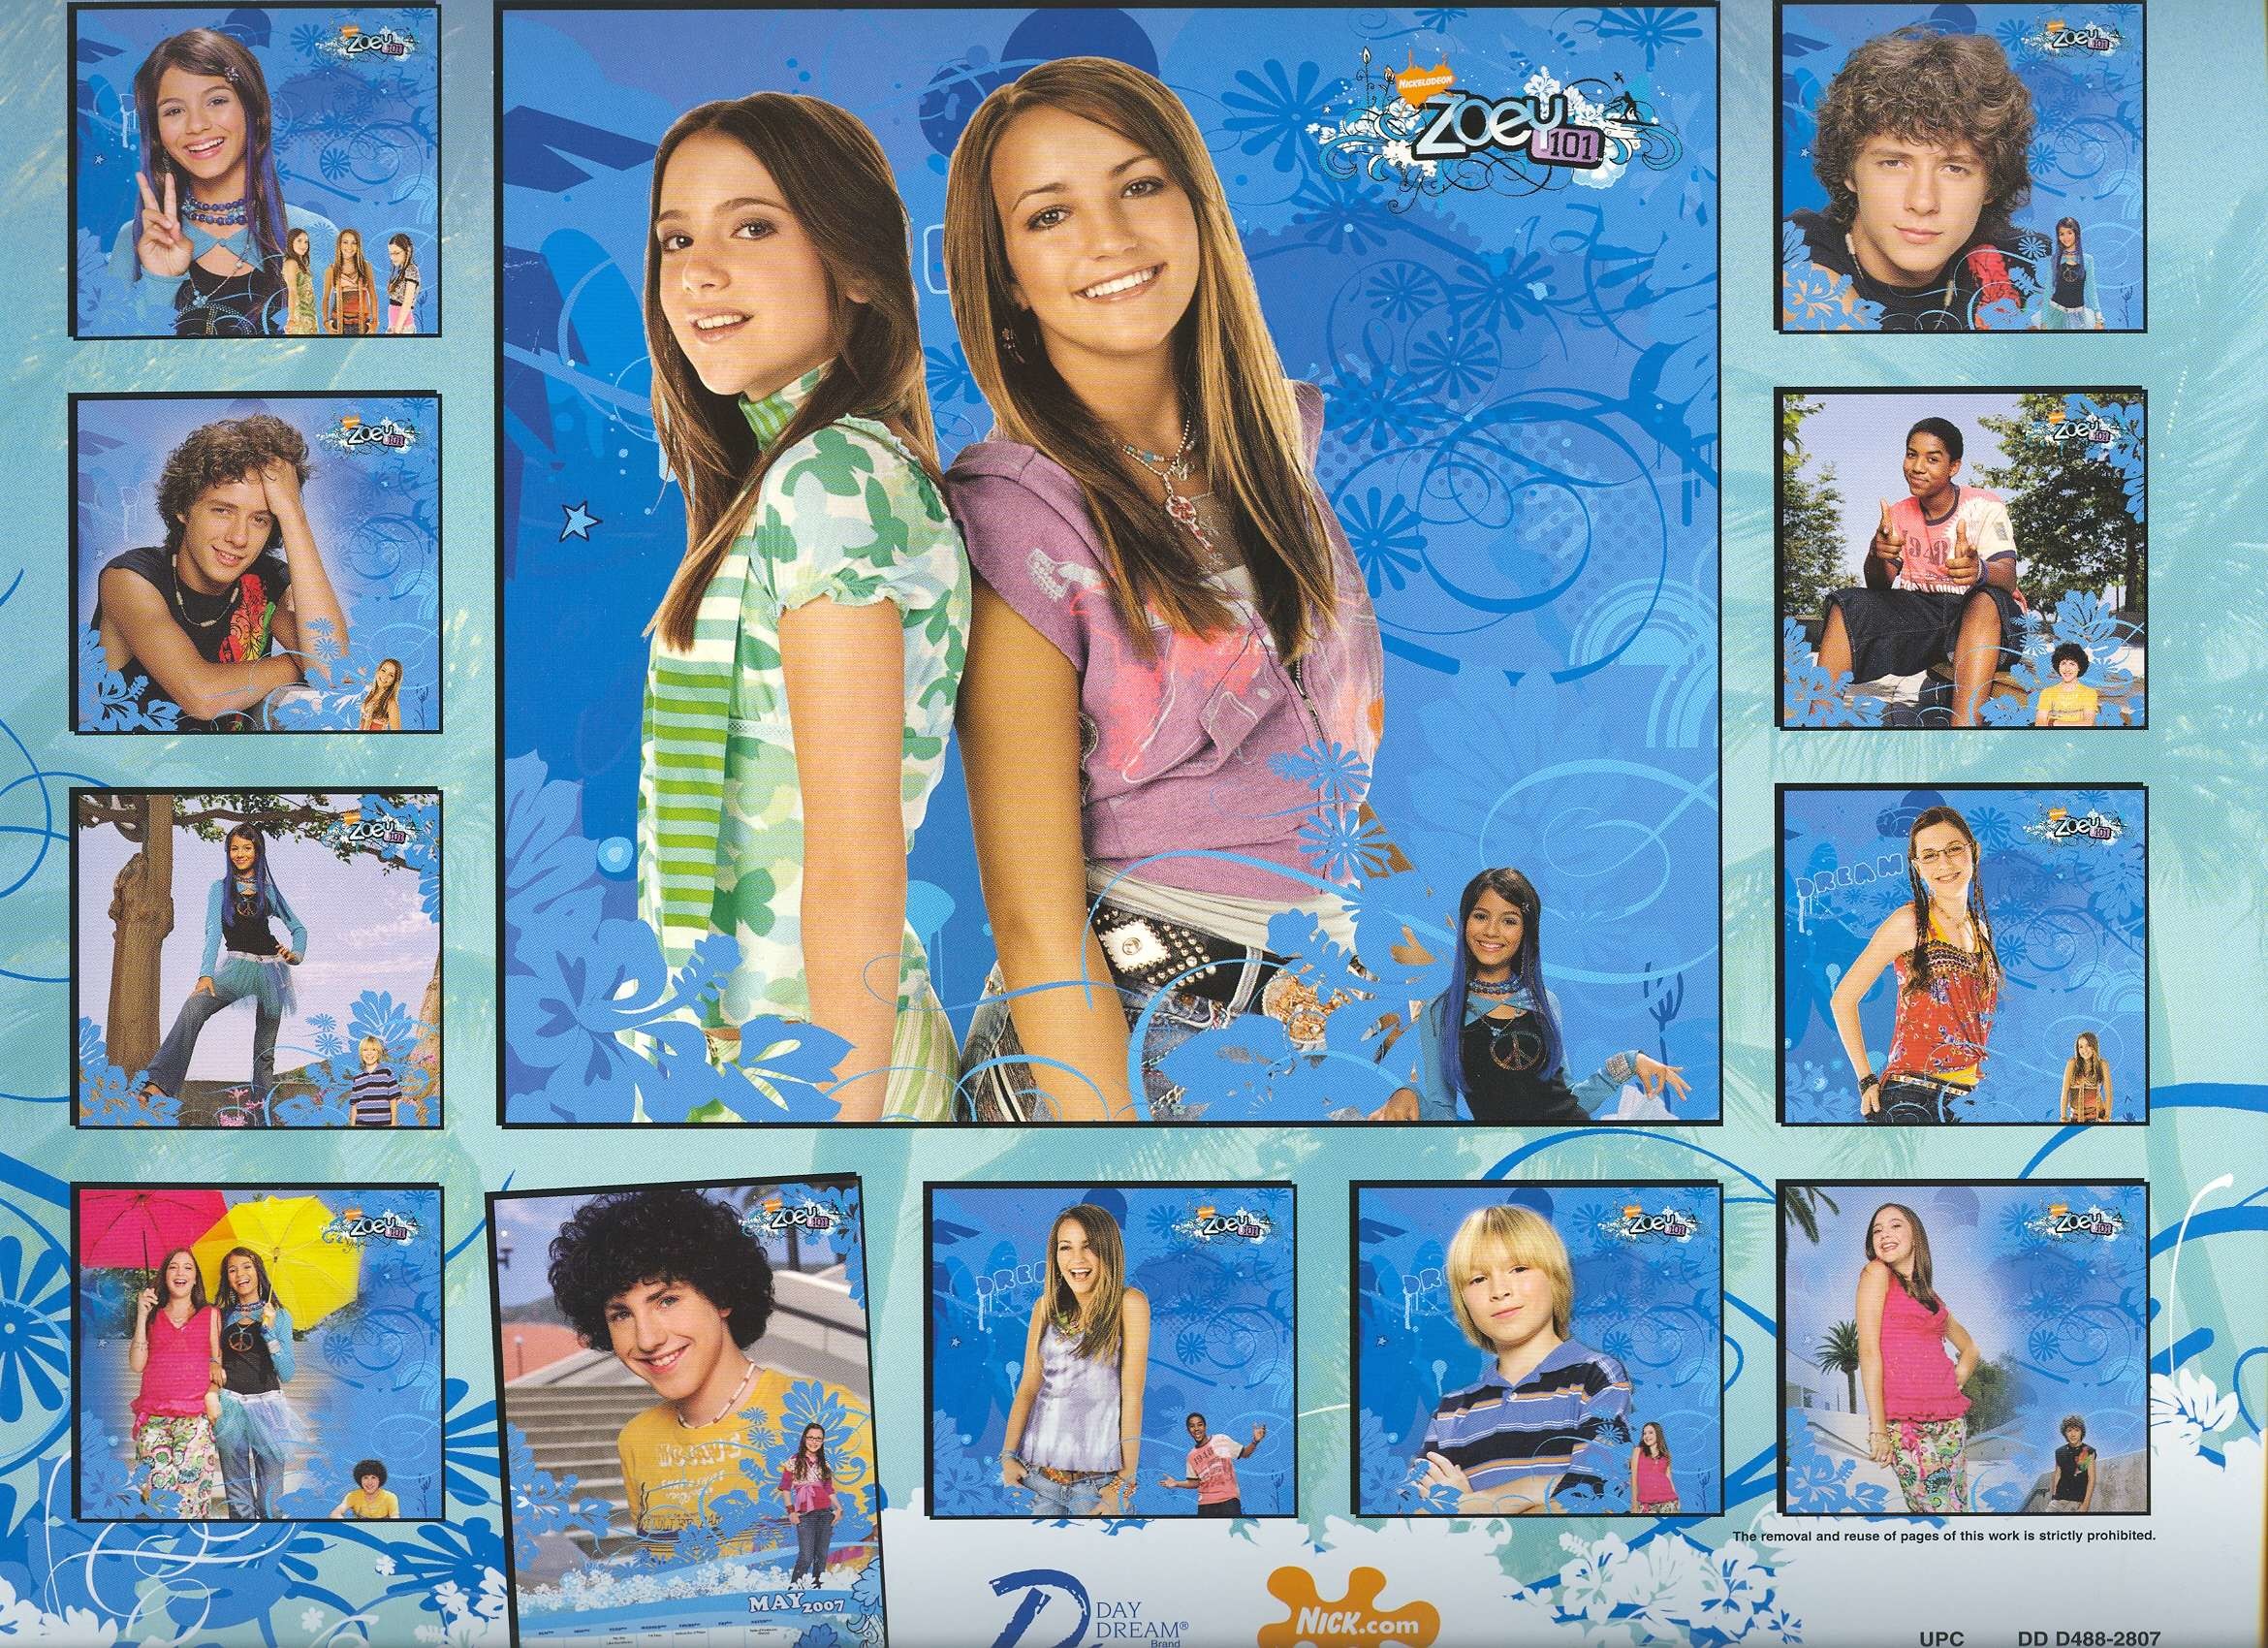 2340x1700 zoey 101 theme tune download Car Tuning